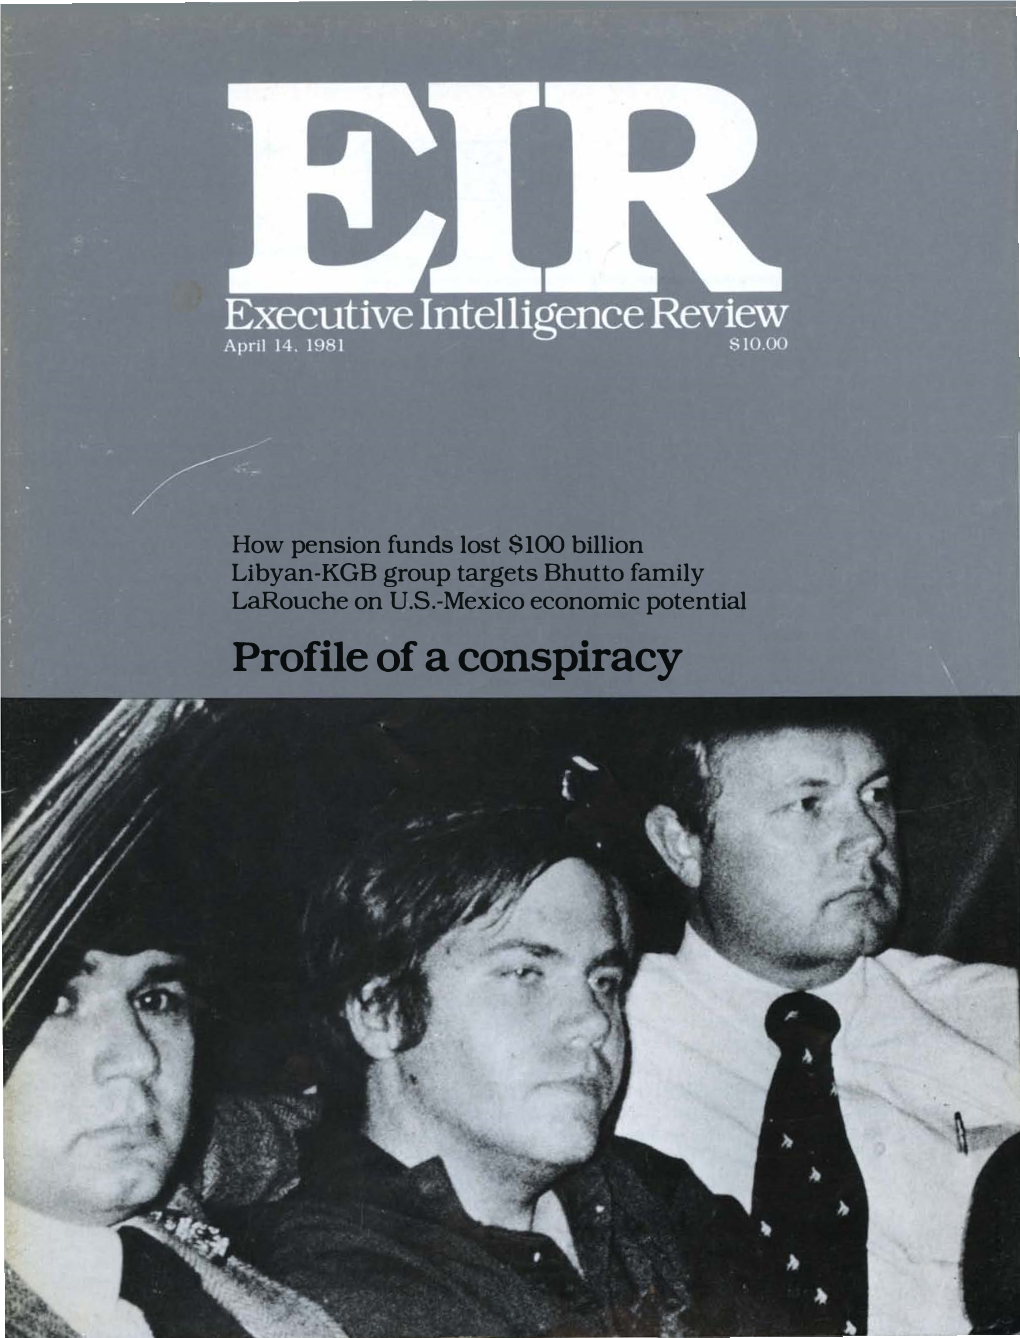 Executive Intelligence Review, Volume 8, Number 15, April 14, 1981